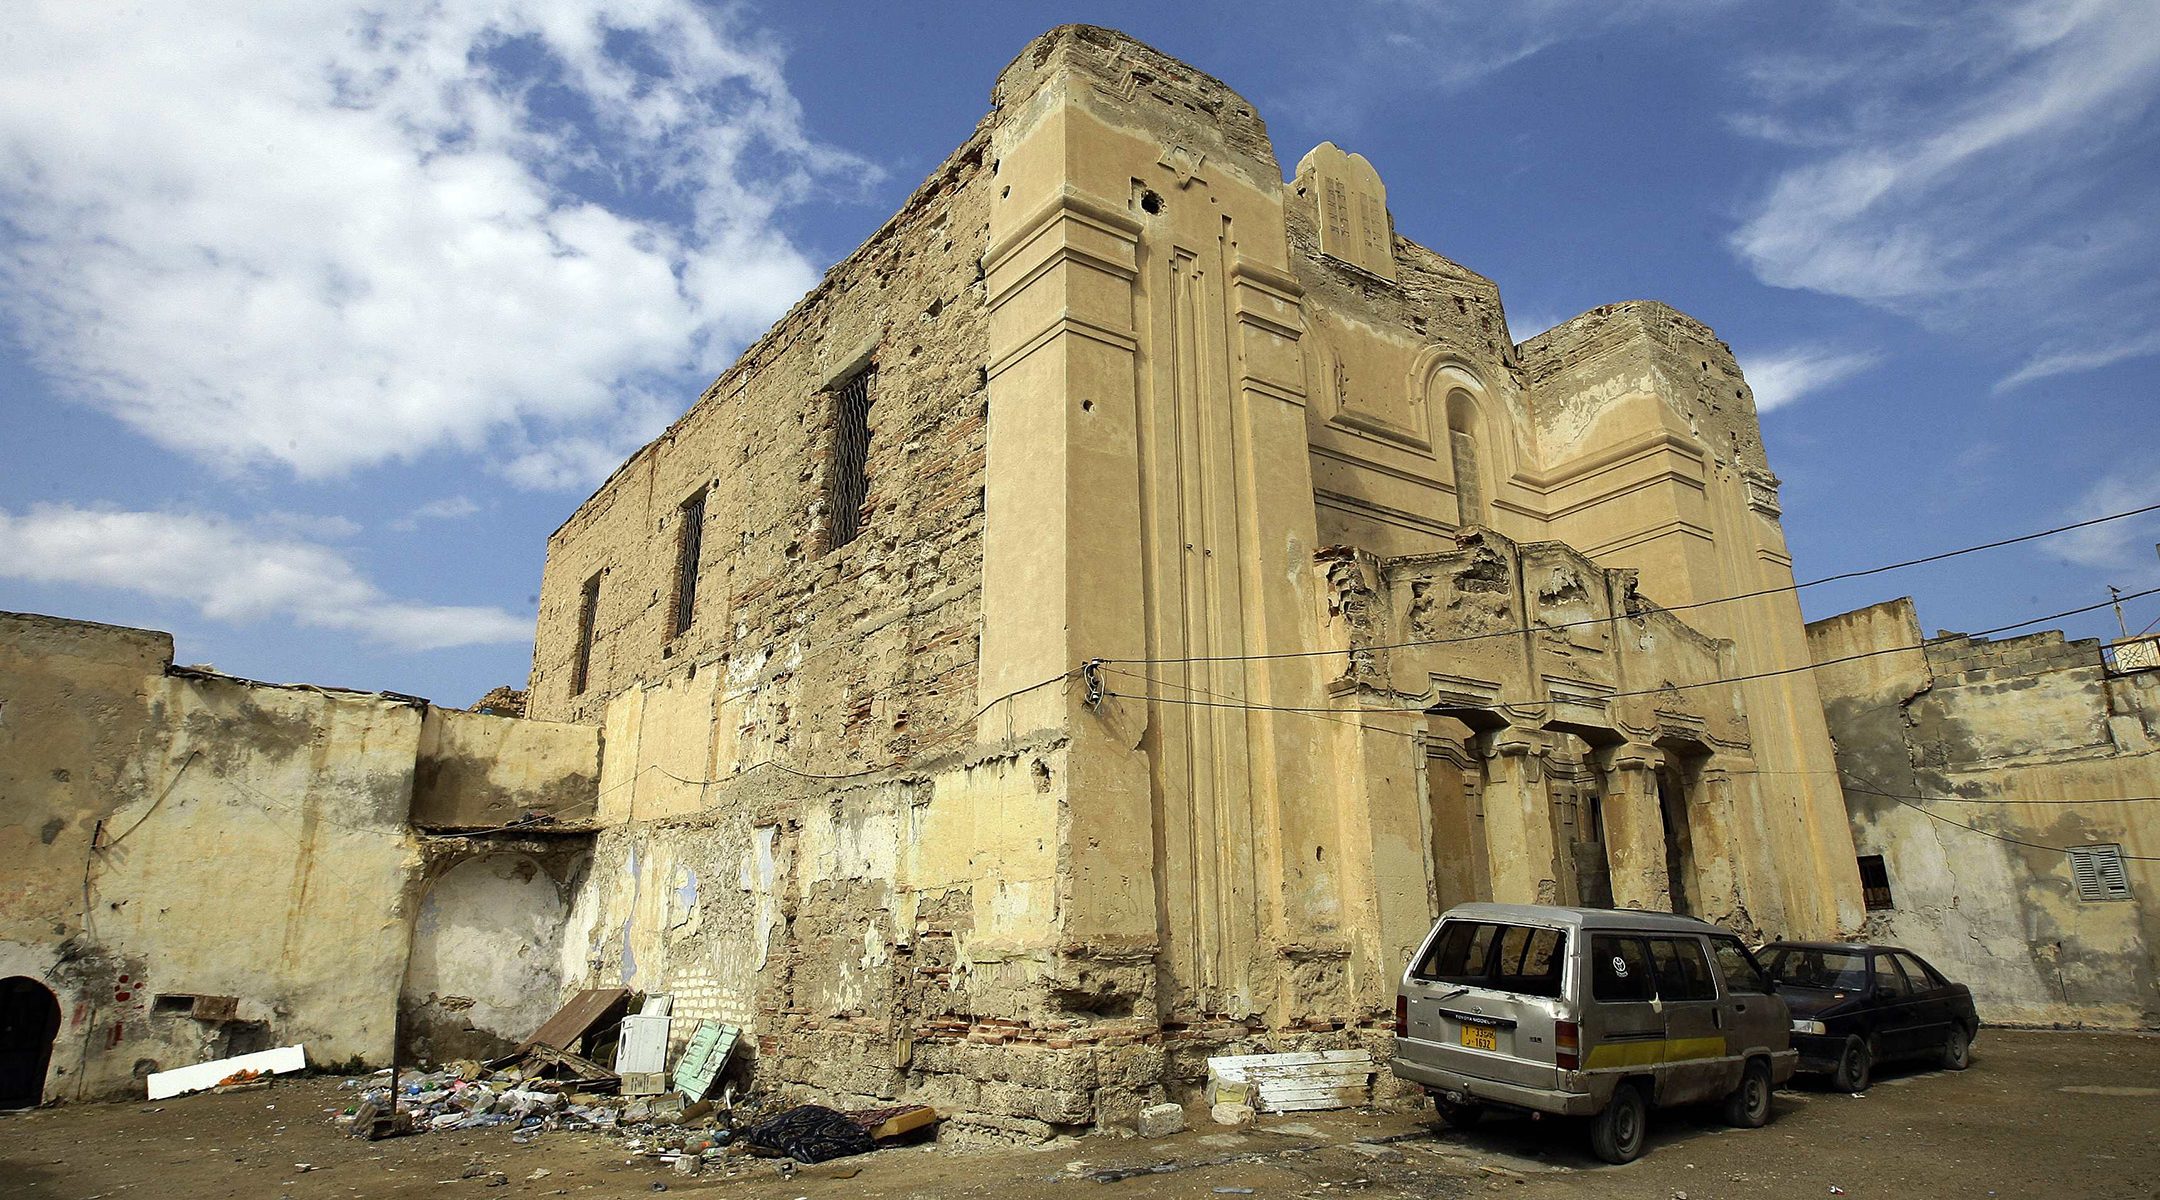 A picture shows the abandoned Dar Bishi synagogue in the Libyan capital Tripoli on September 28, 2011. (Joseph Eid/AFP via Getty Images)